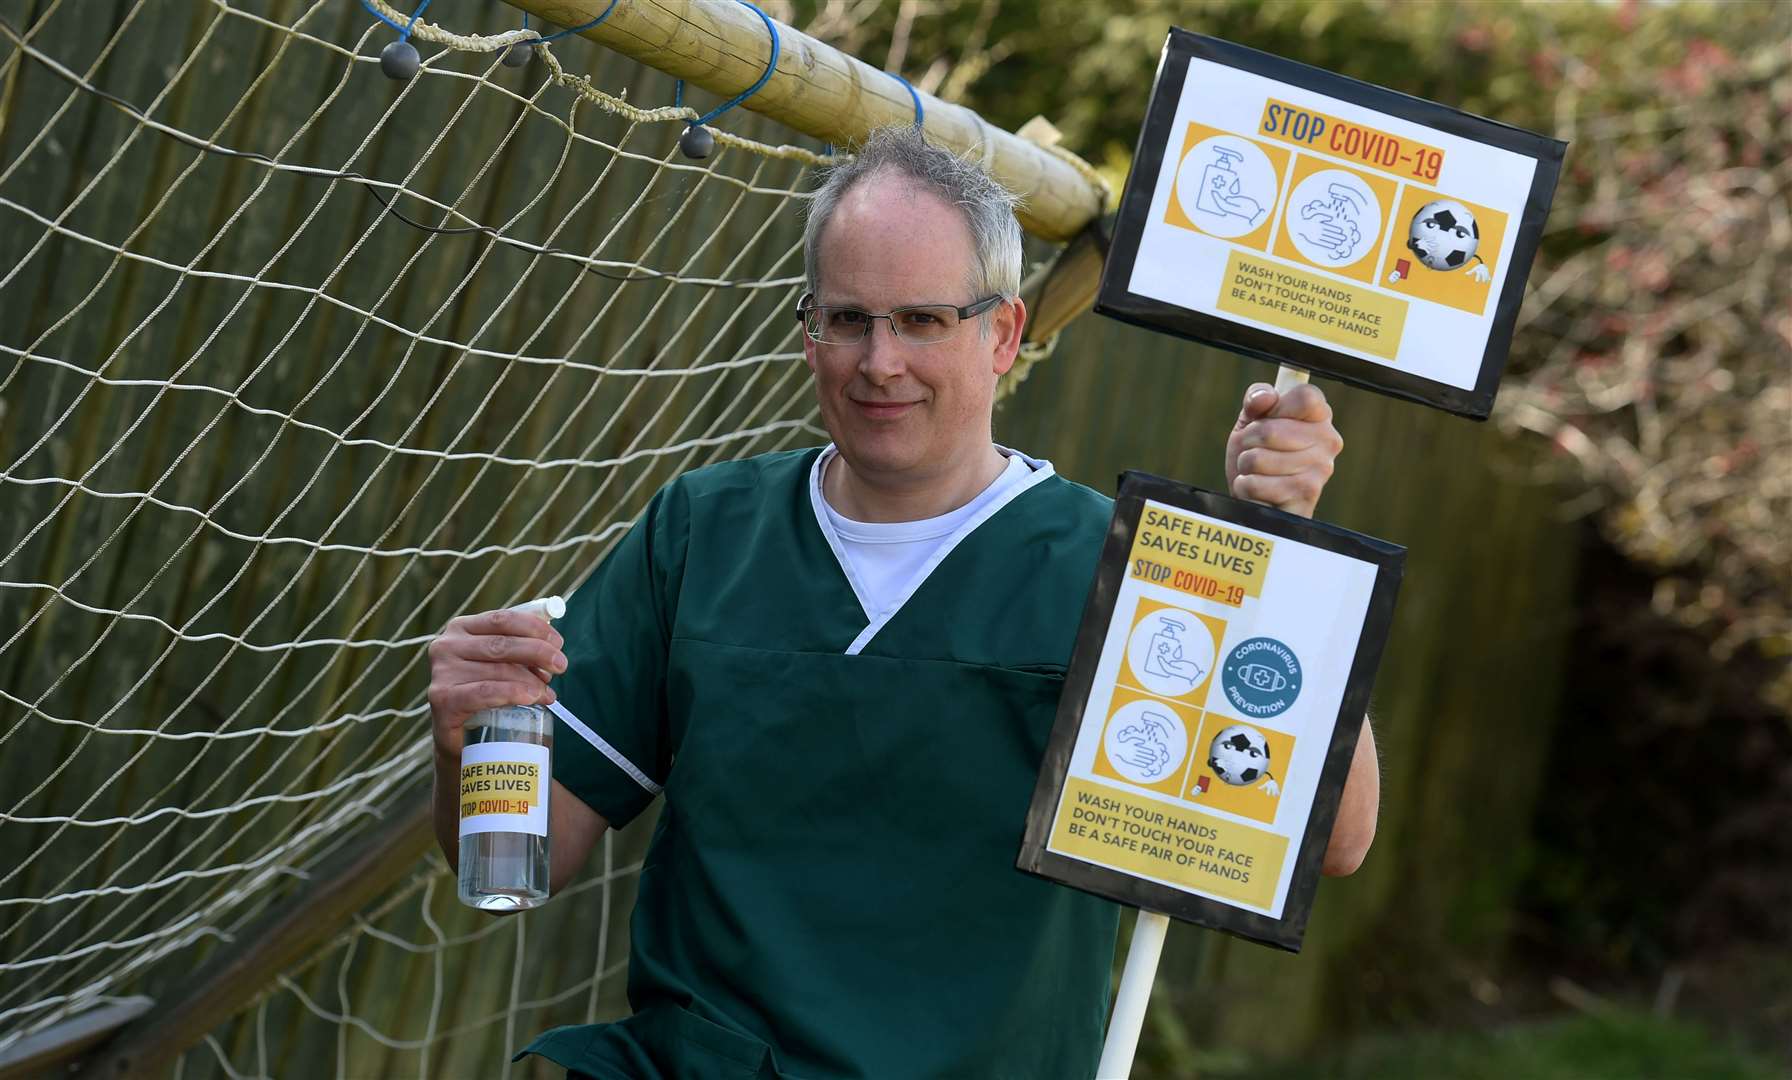 GP Dr Ross Jaffrey launched the Safe Hands, Saves Lives group at the start of the pandemic.